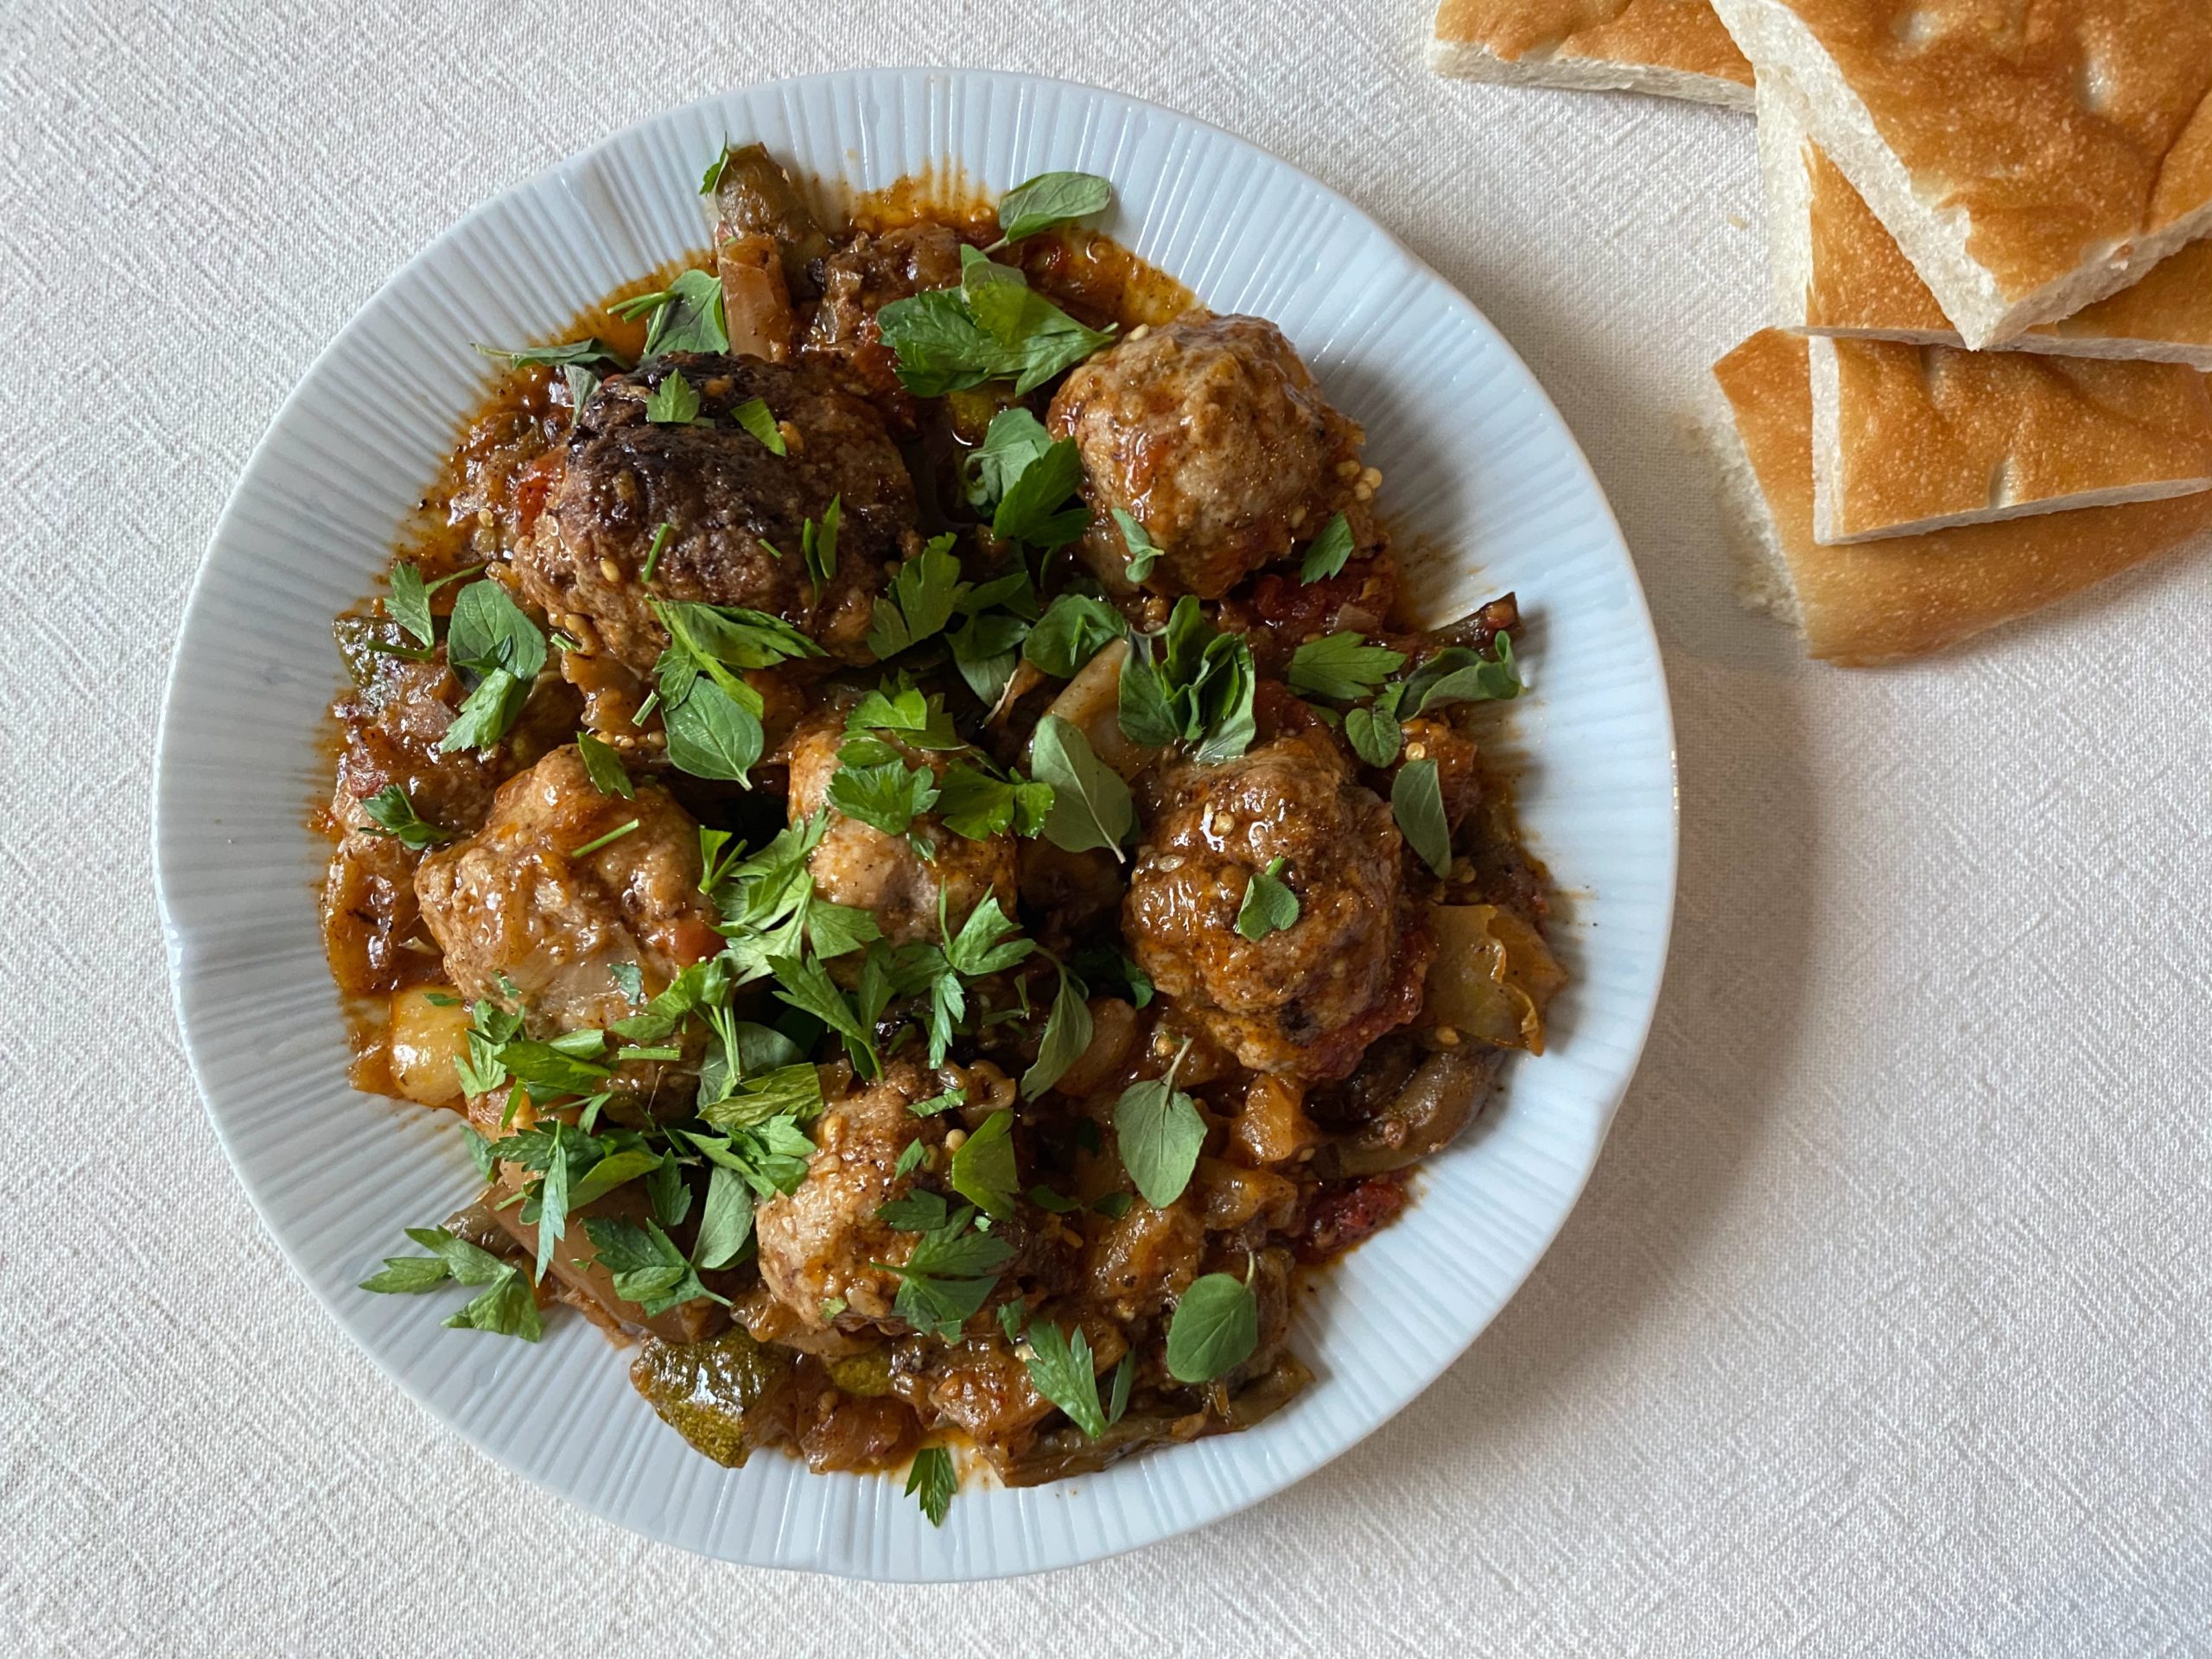 This plant-based take on meatballs resembles the flavors of Italia...